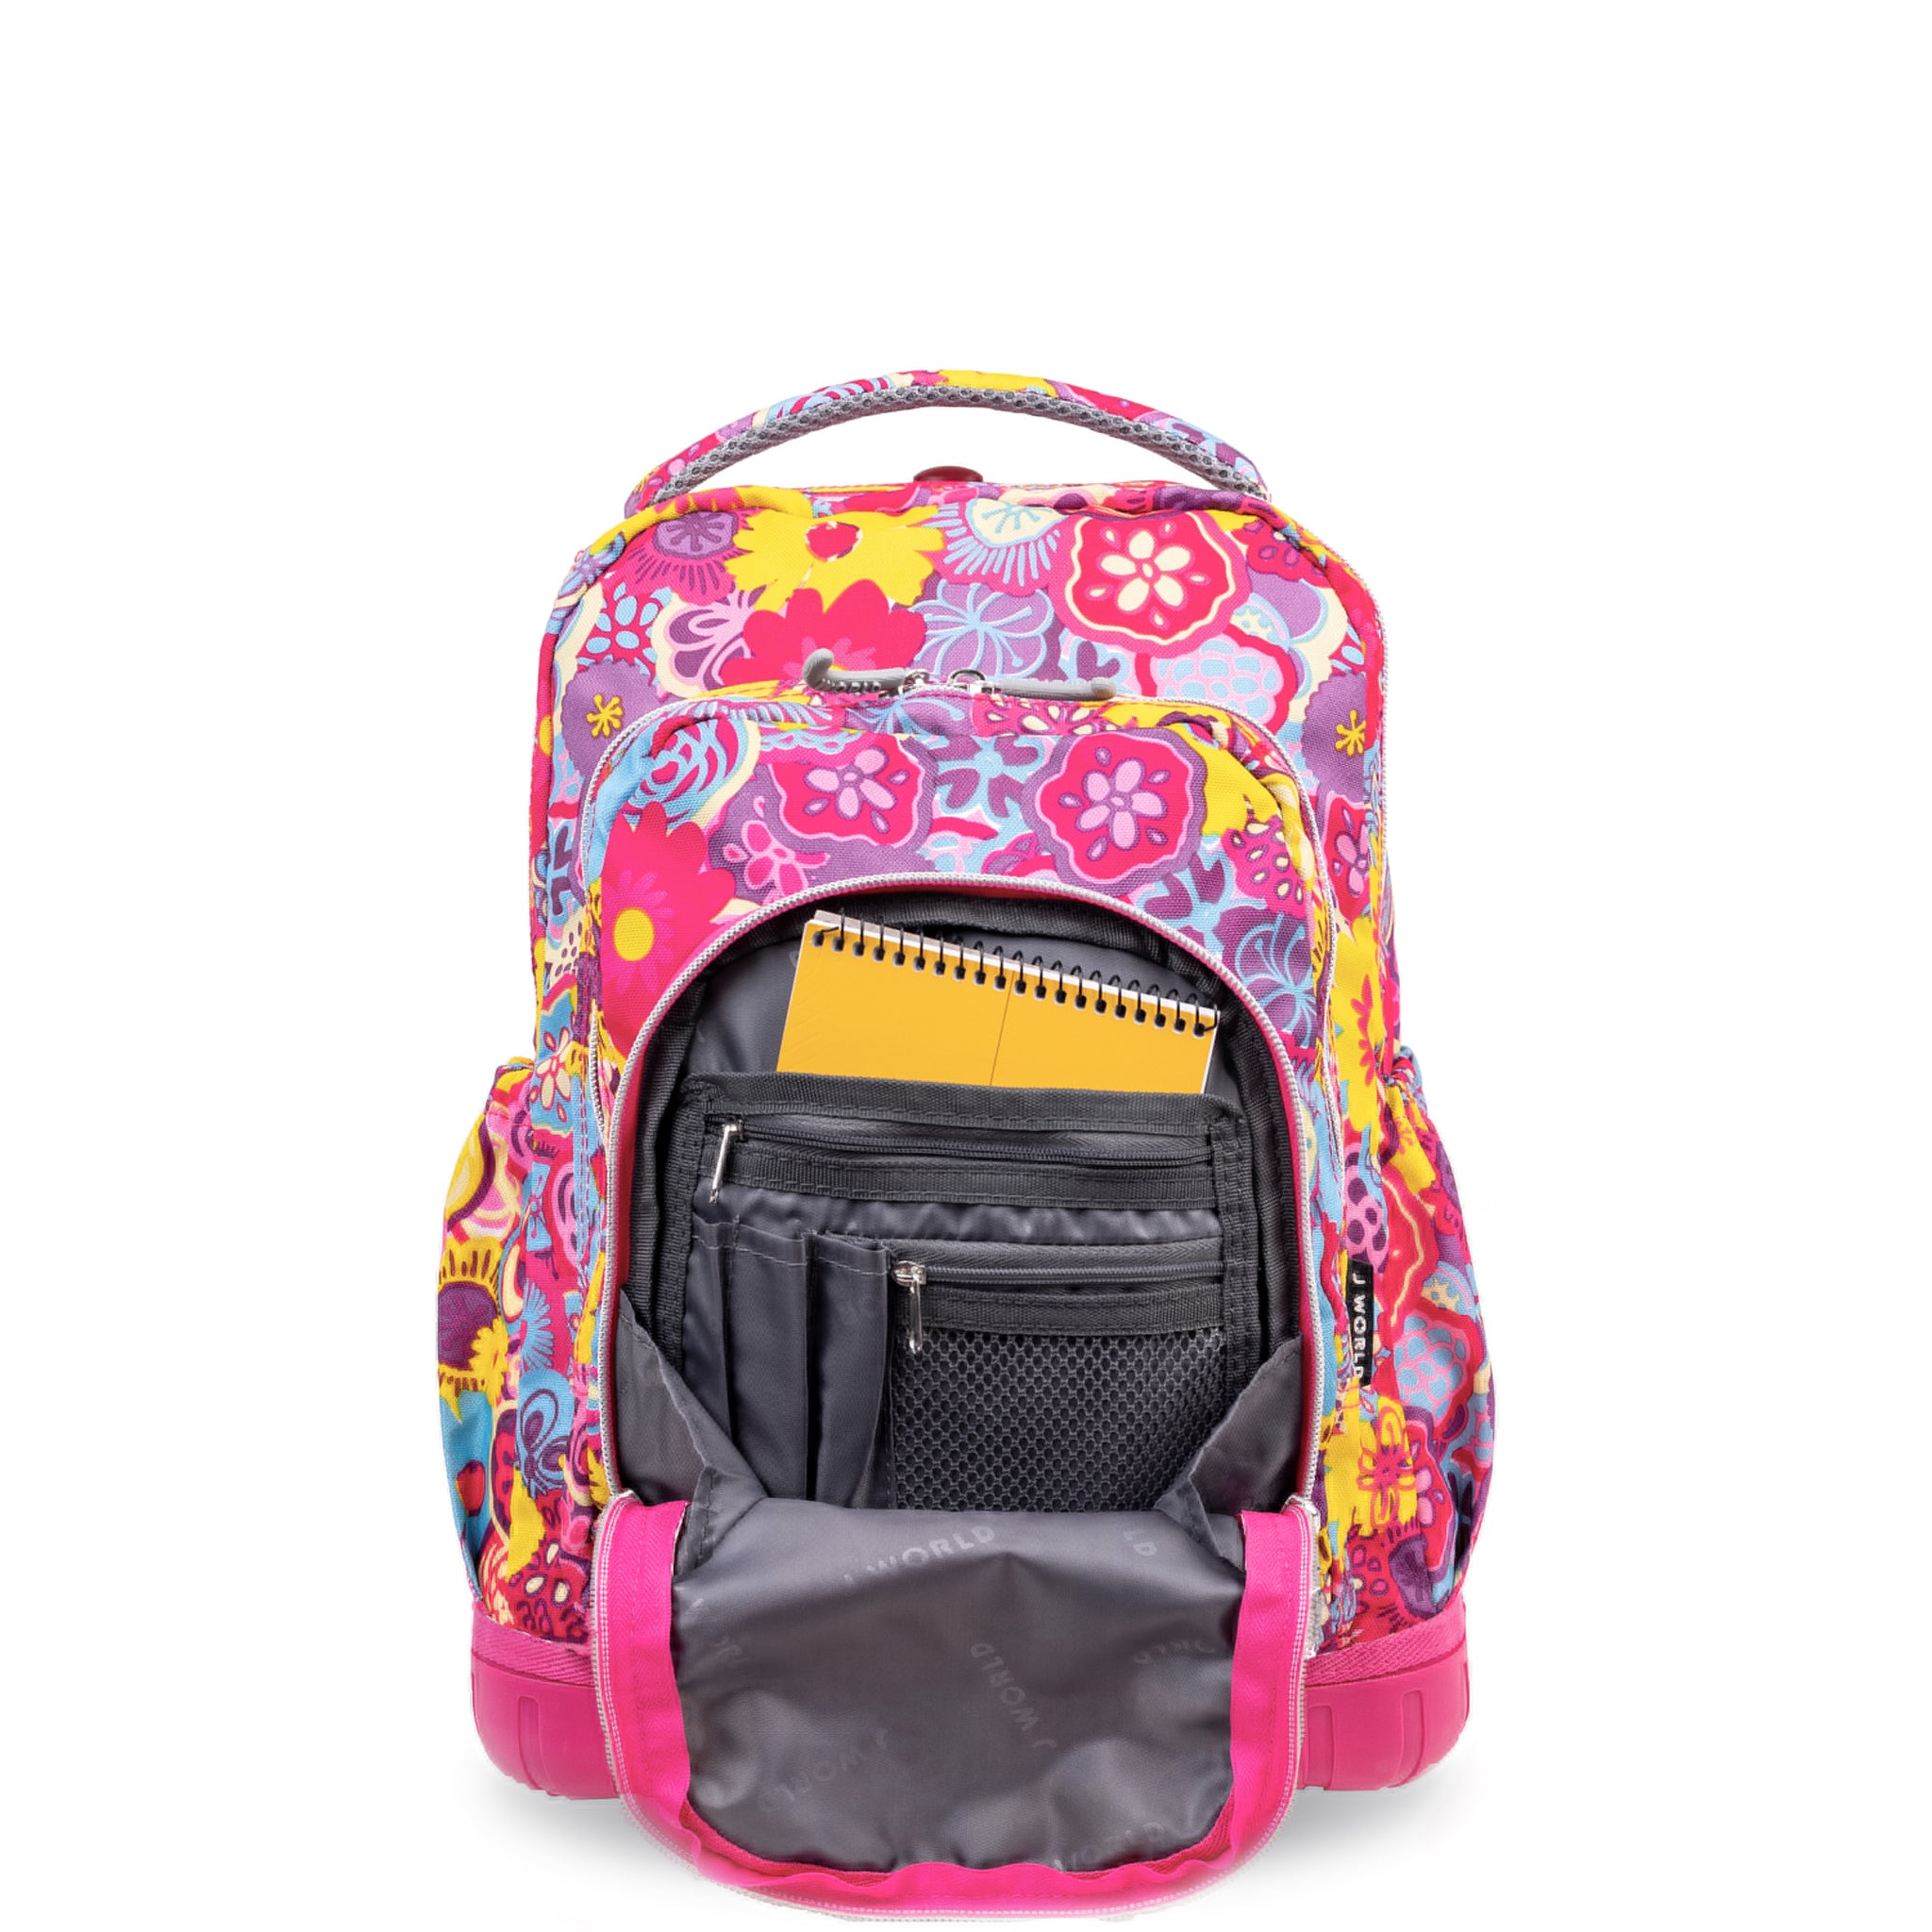 J World Lollipop Poppy Pansy 16" Kids Rolling Backpack and Lunch Bag